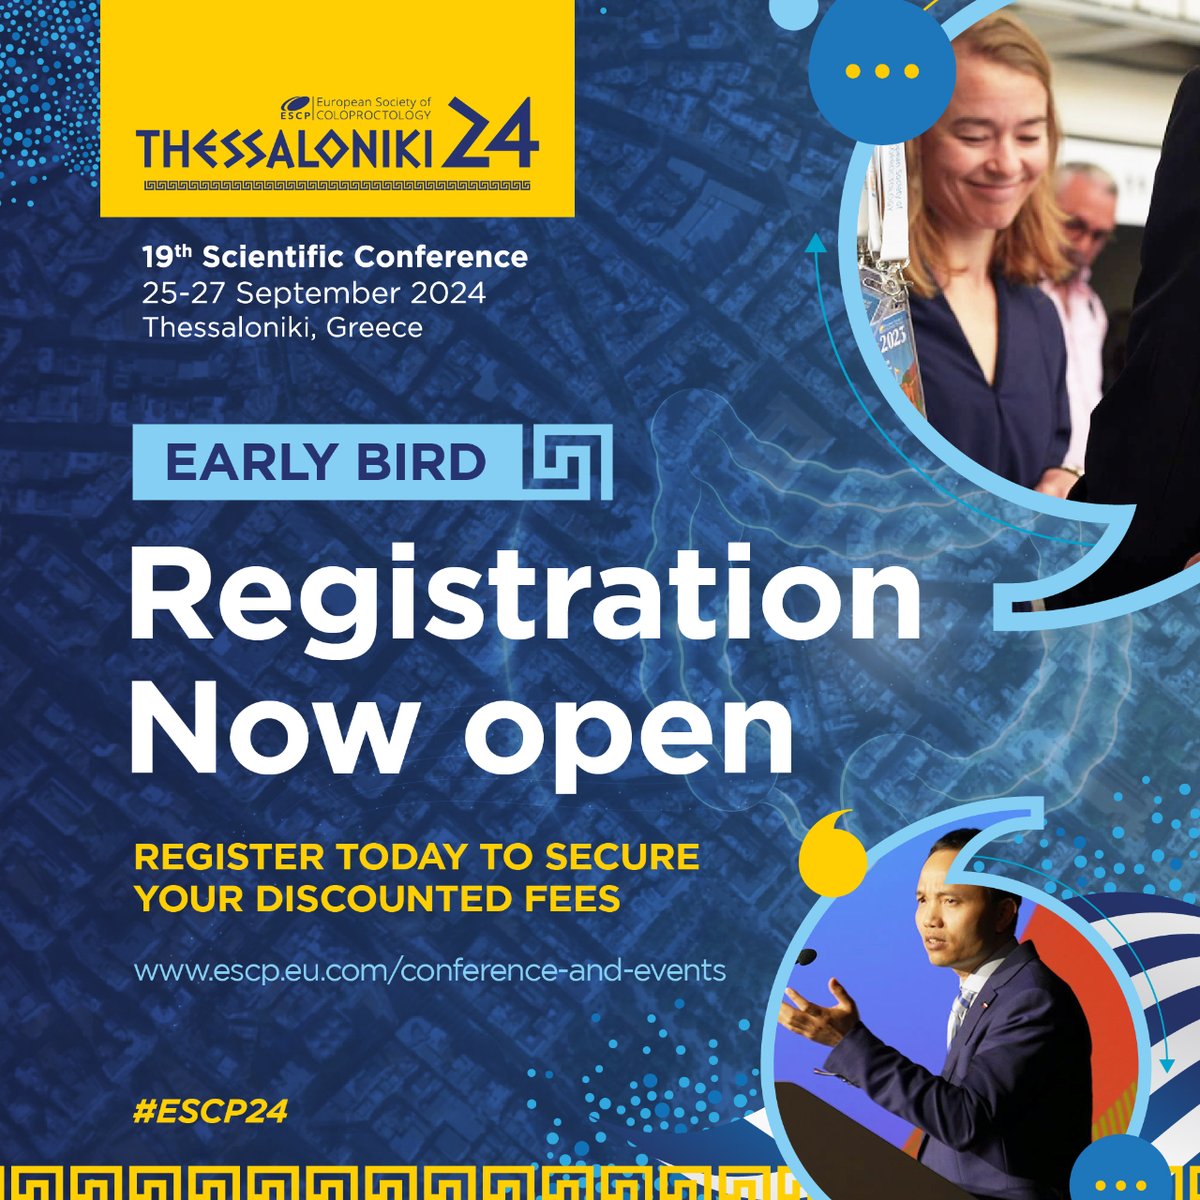 📢 Registration for #ESCP24 is now OPEN!  Register today to save up to €200 with our early bird discount - will we see you in Thessaloniki this September? i.mtr.cool/cpsyzummpm